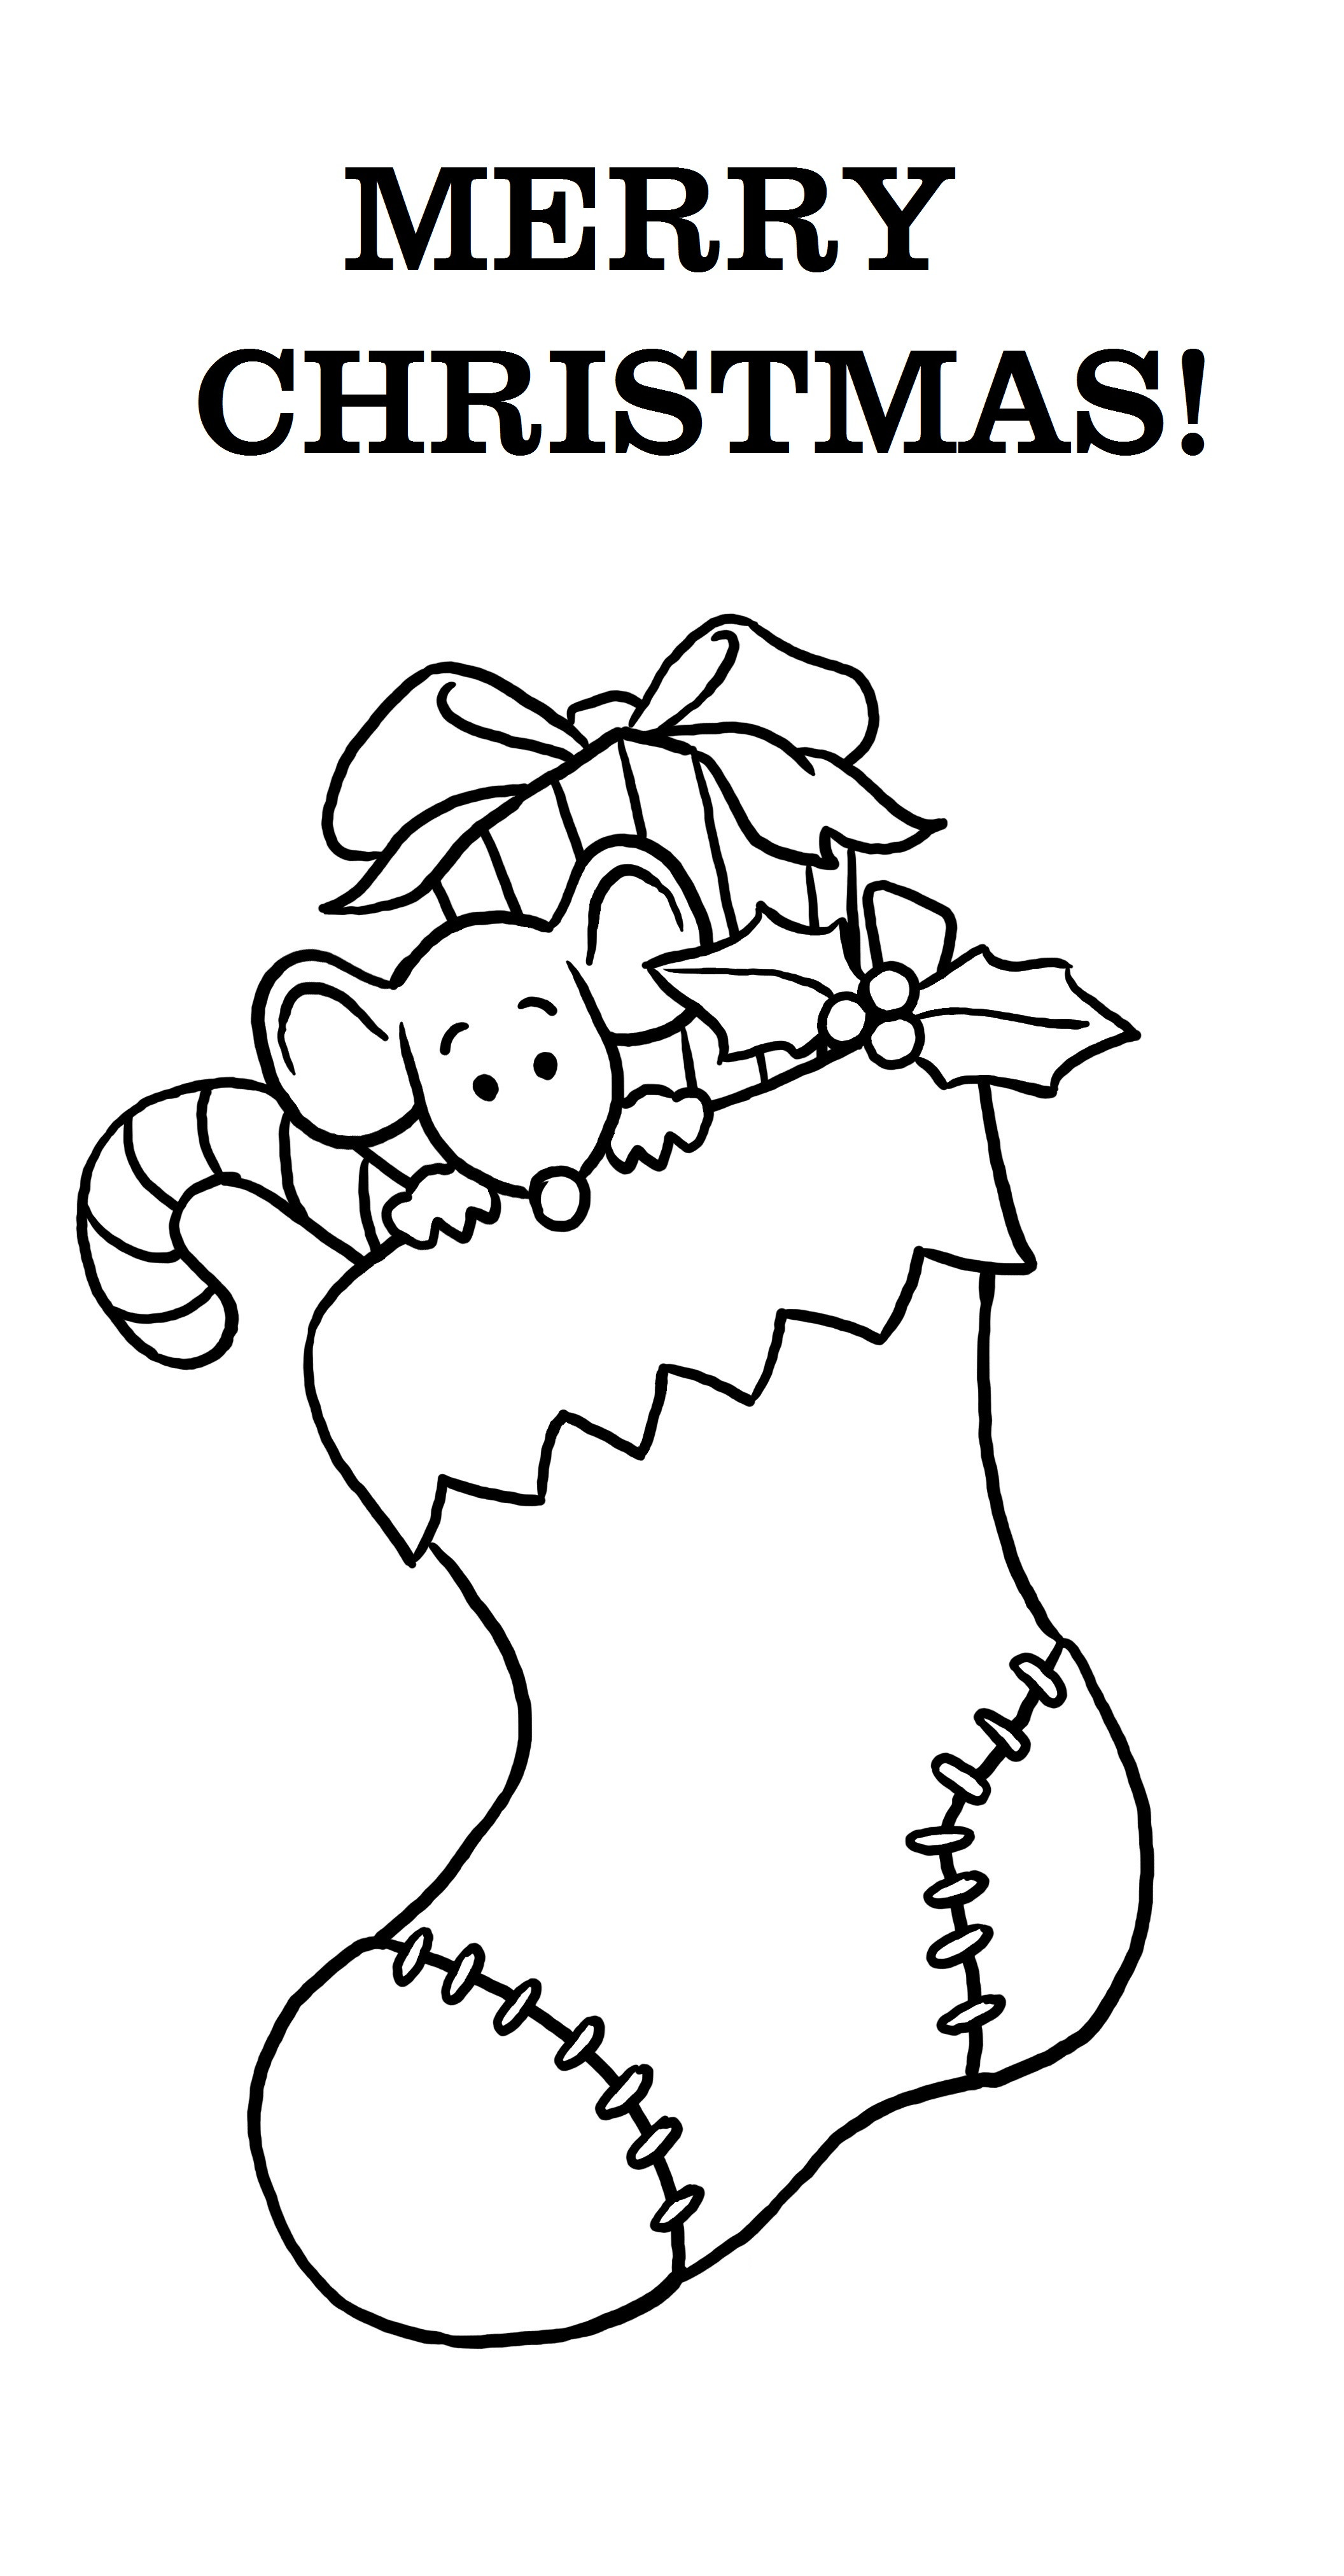 Christmas Coloring Book Pages
 Free Printable Merry Christmas Coloring Pages